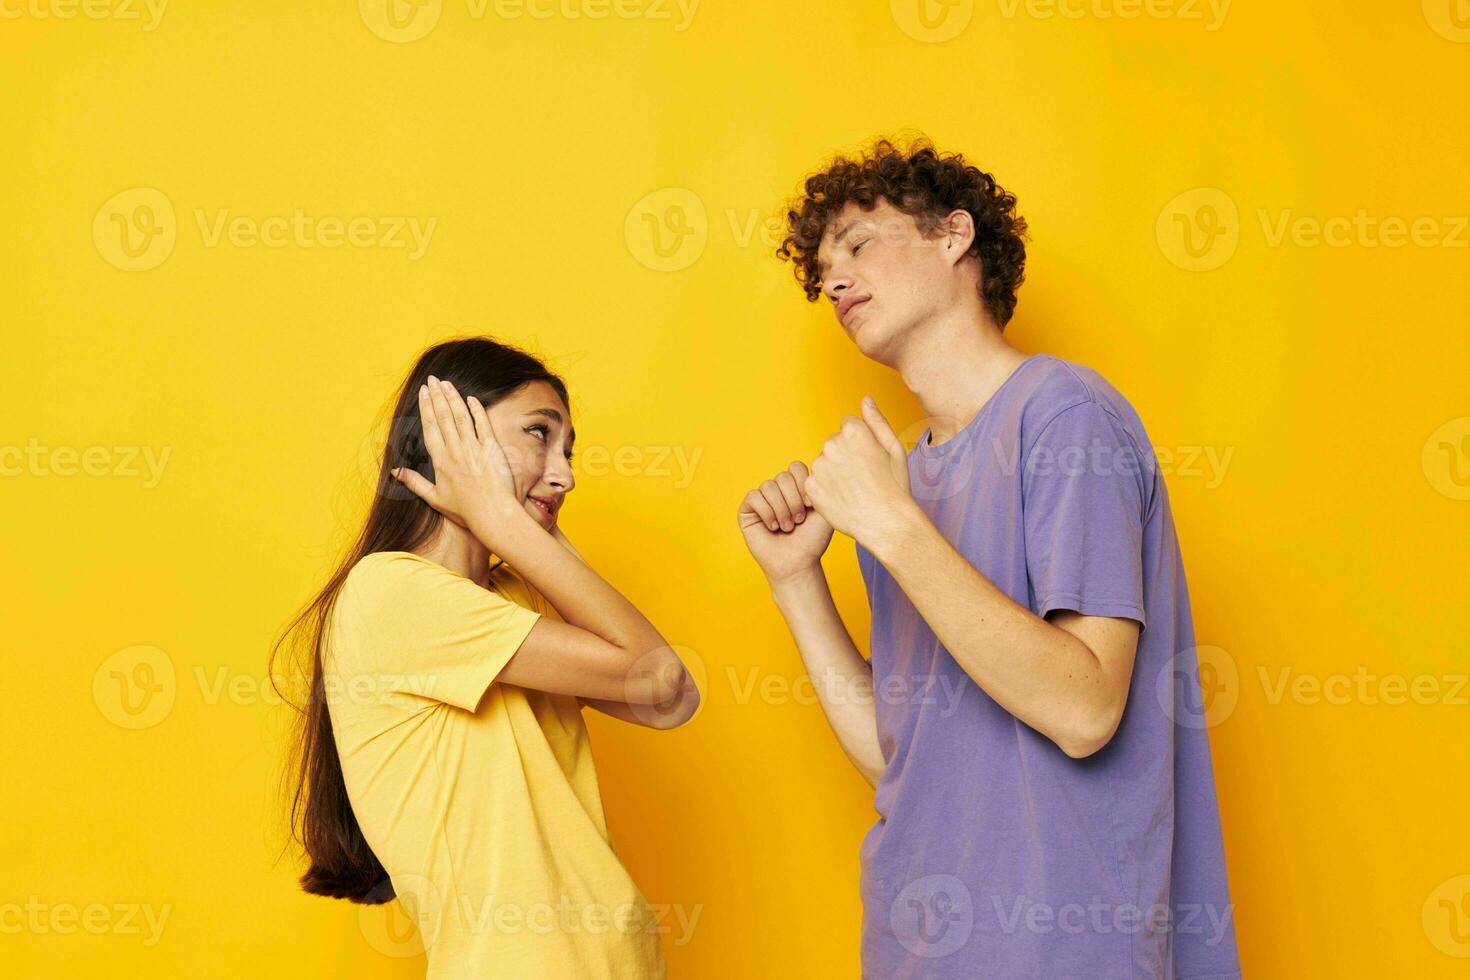 portrait of a man and a woman casual clothes posing emotions antics isolated background unaltered photo